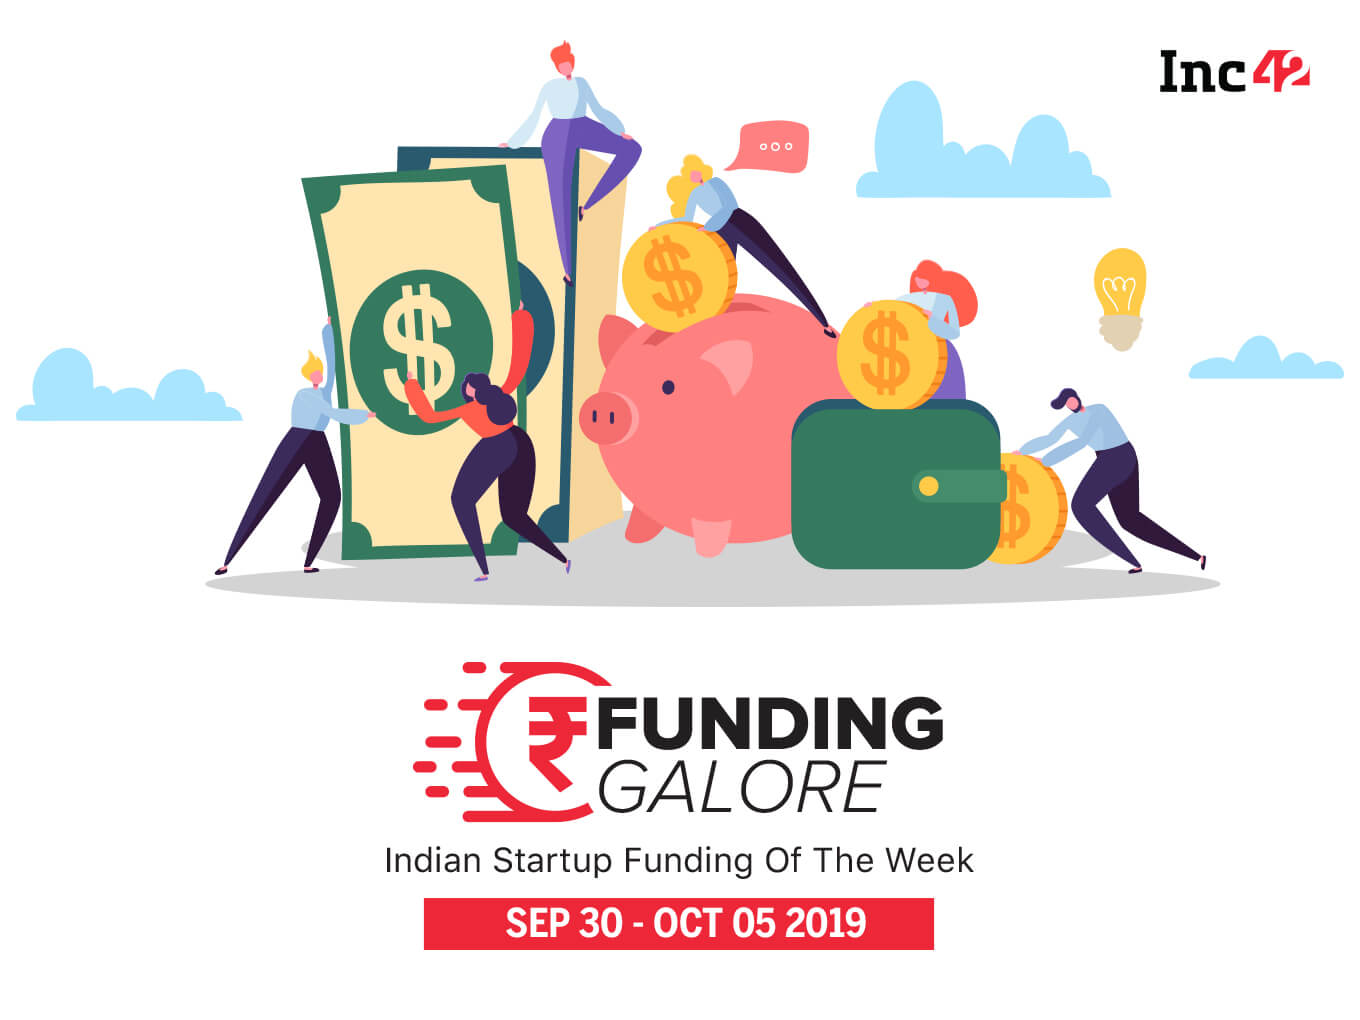 We bring to you the latest edition of Funding Galore: Indian Startup Funding Of The Week!